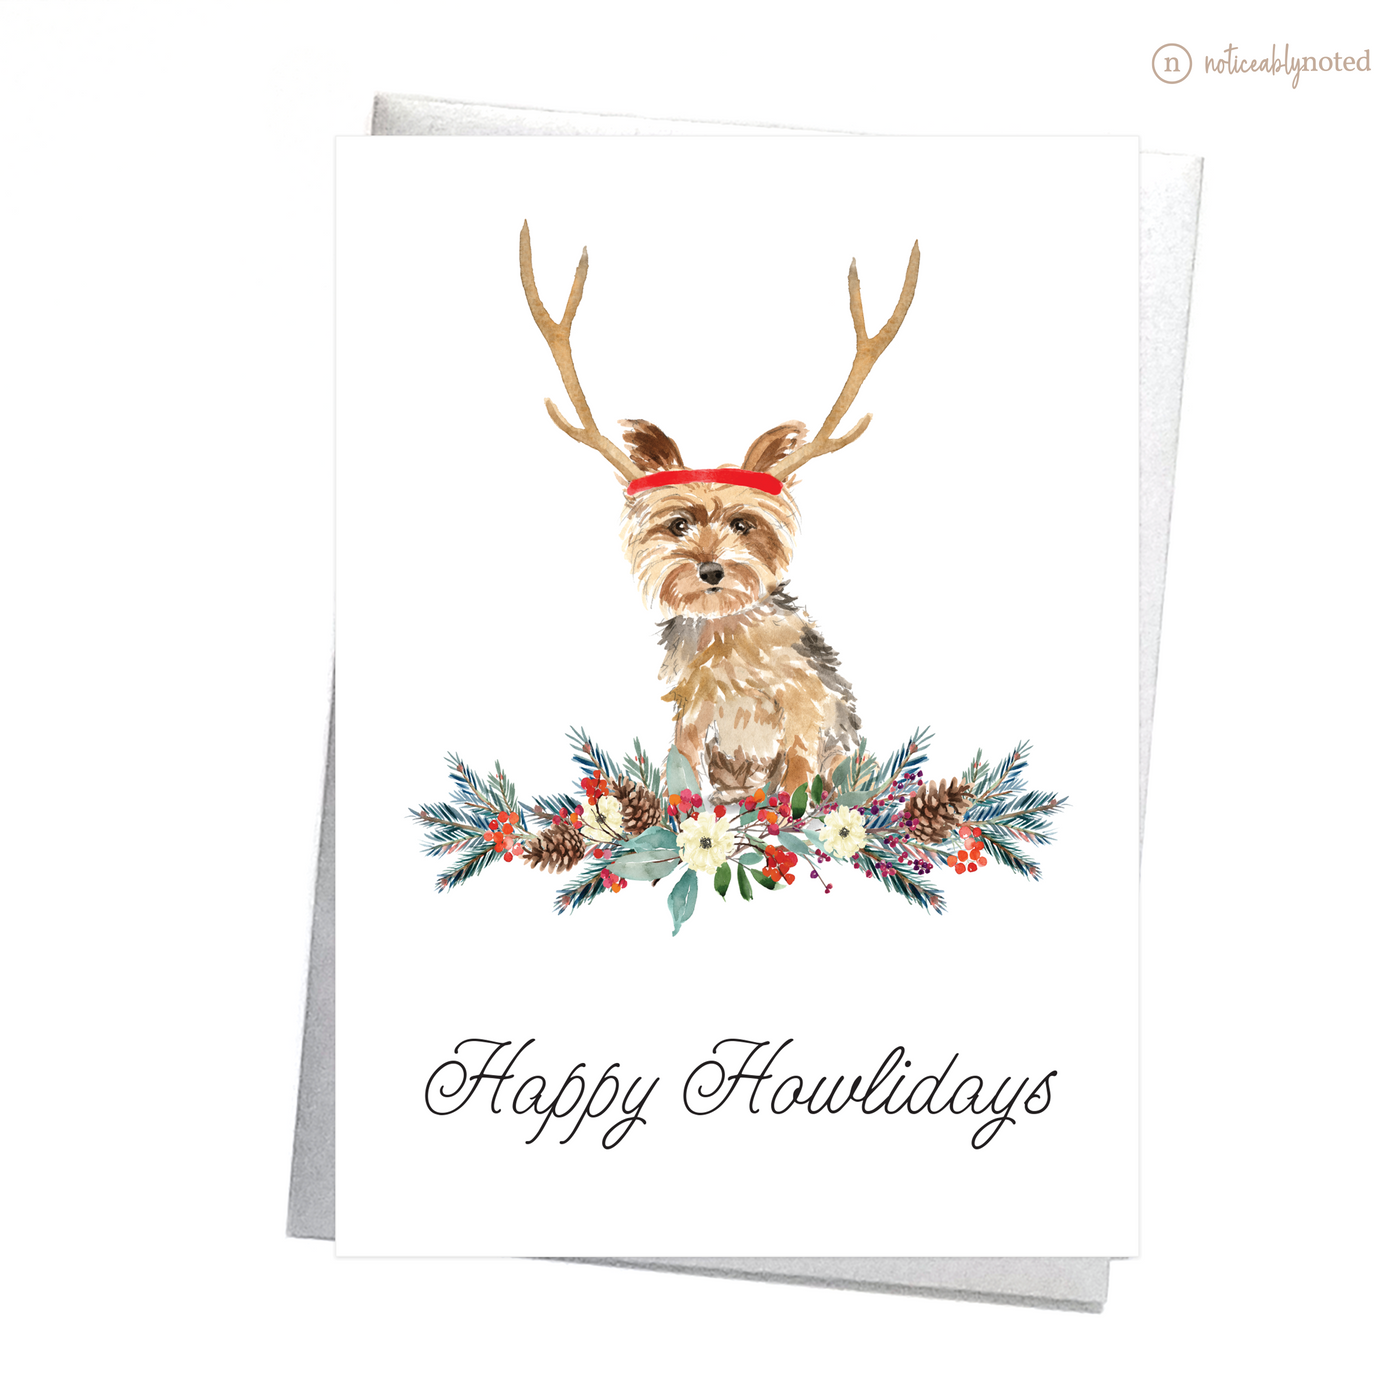 Yorkshire Terrier Christmas Card | Noticeably Noted